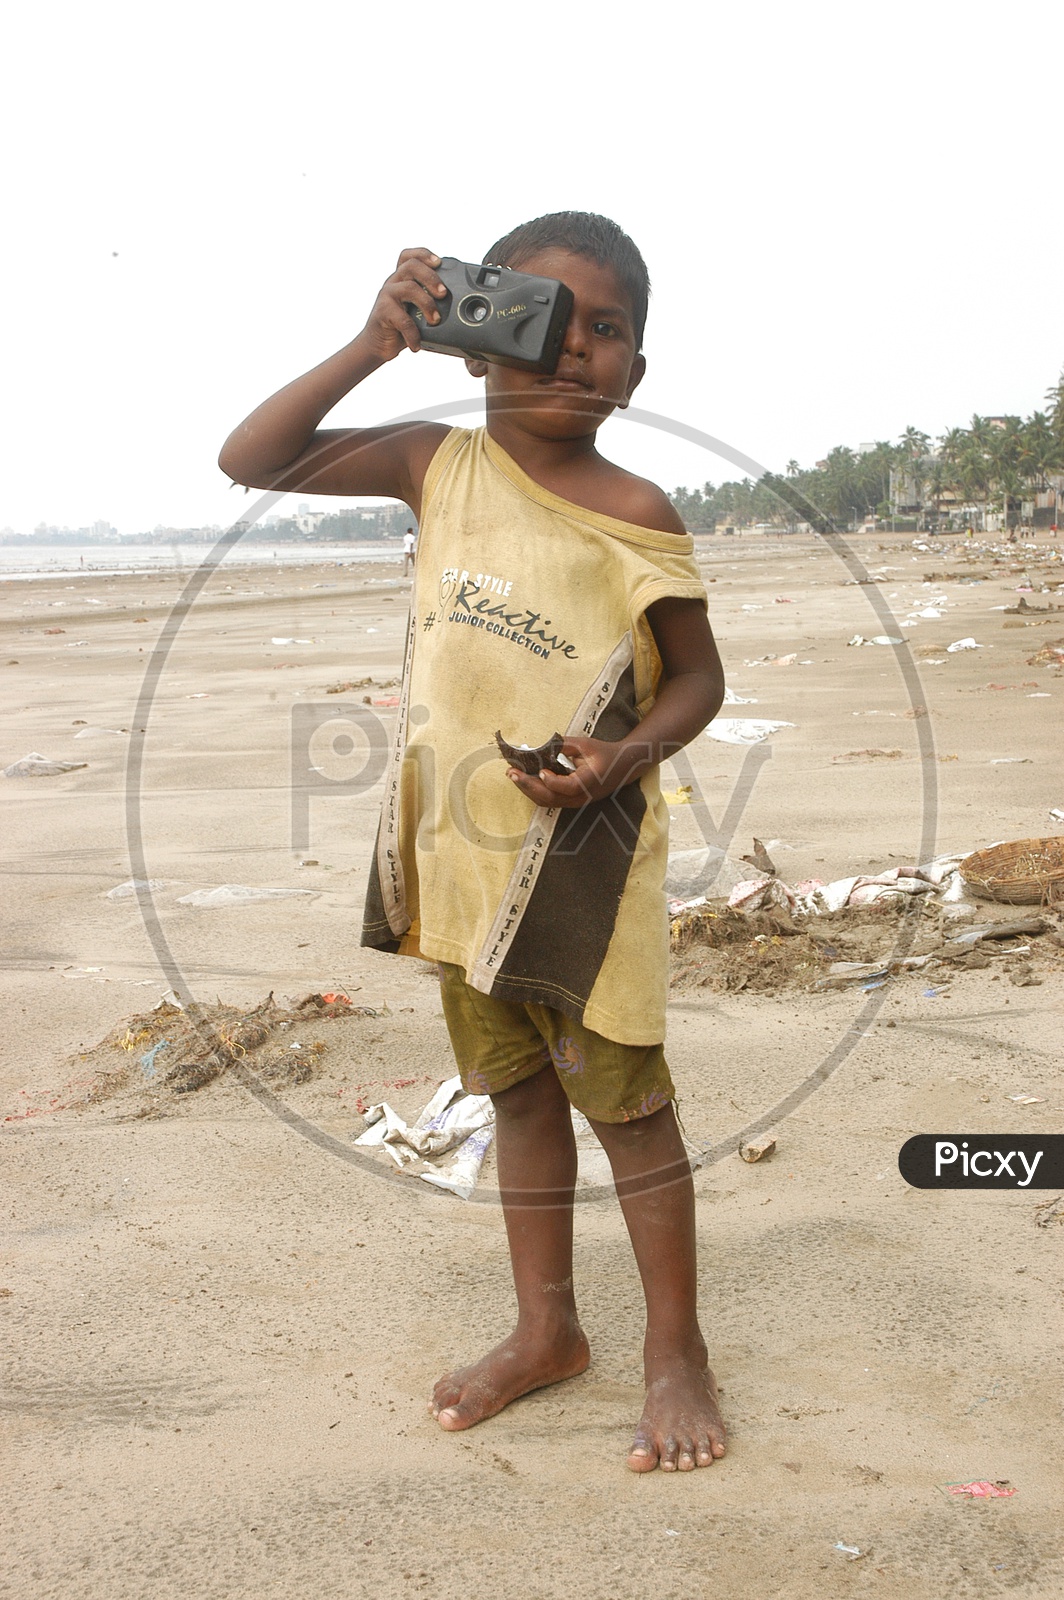 Poor Kid with a camera